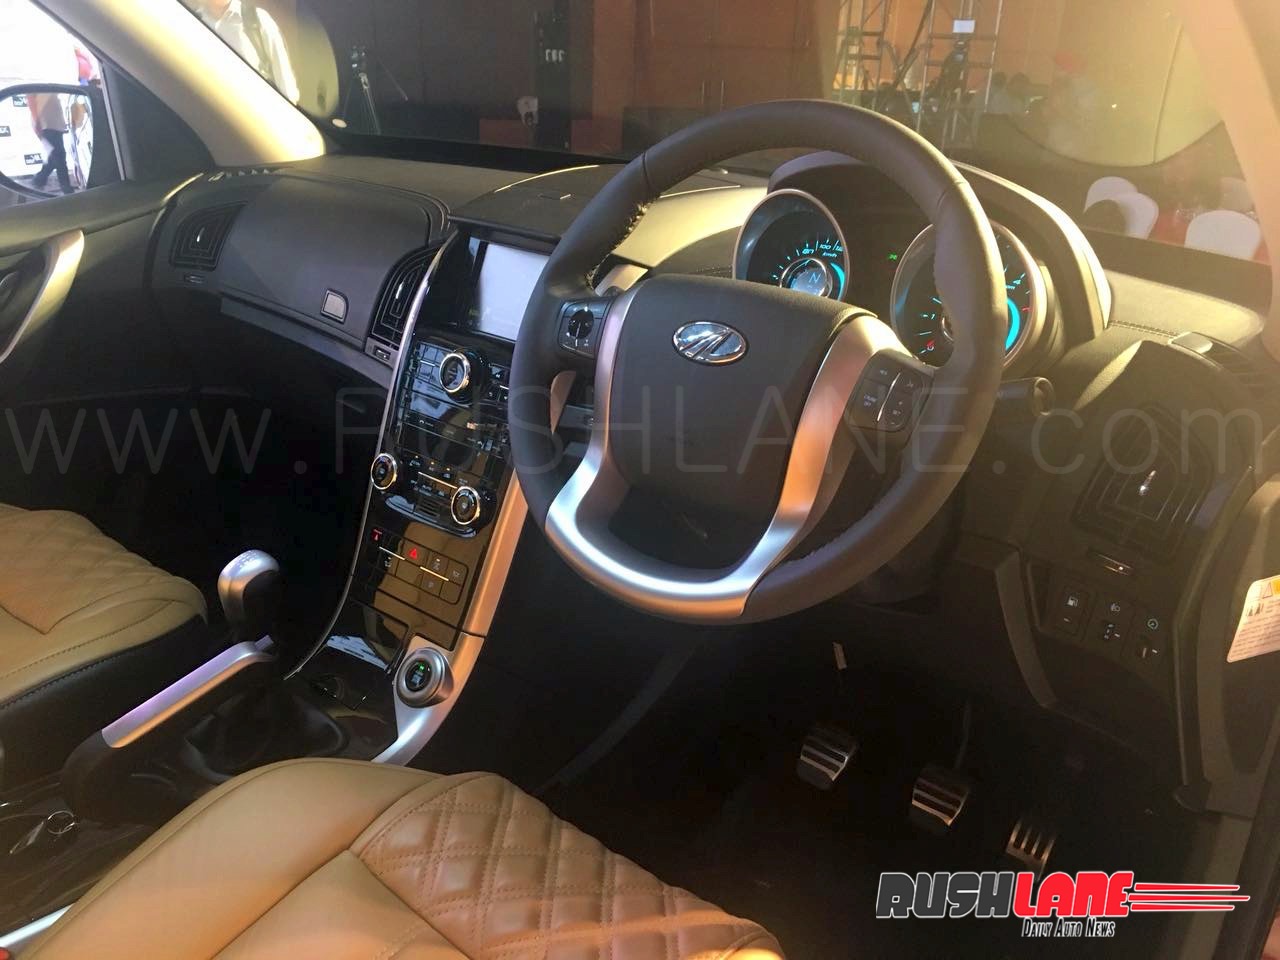 2018 Mahindra Xuv500 Launched In India Priced From Rs